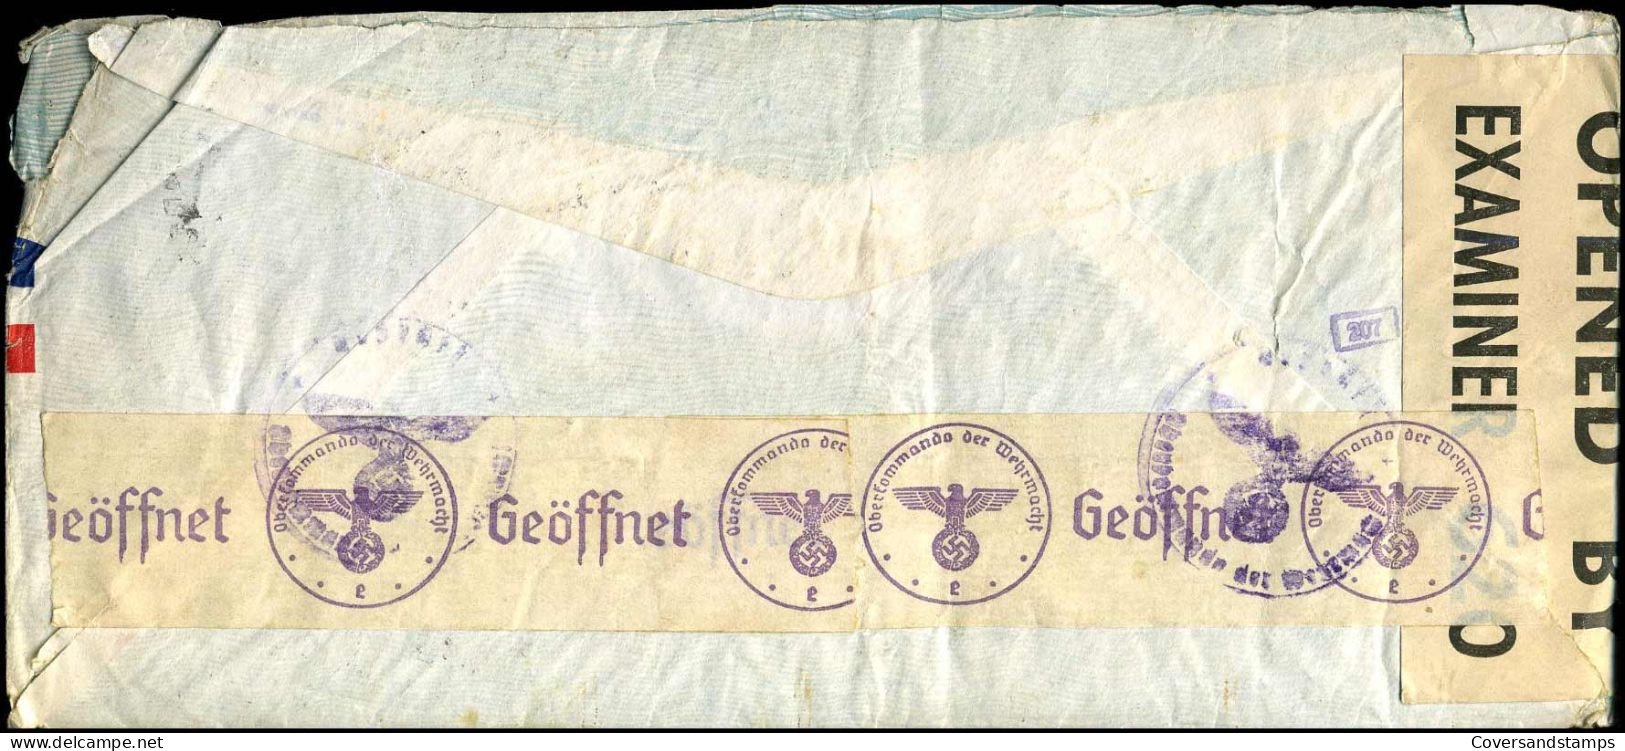 Cover To Courcelles, Belgium - Opened By Examiner 620 - Oberkommando Der Wehrmacht - Lettres & Documents